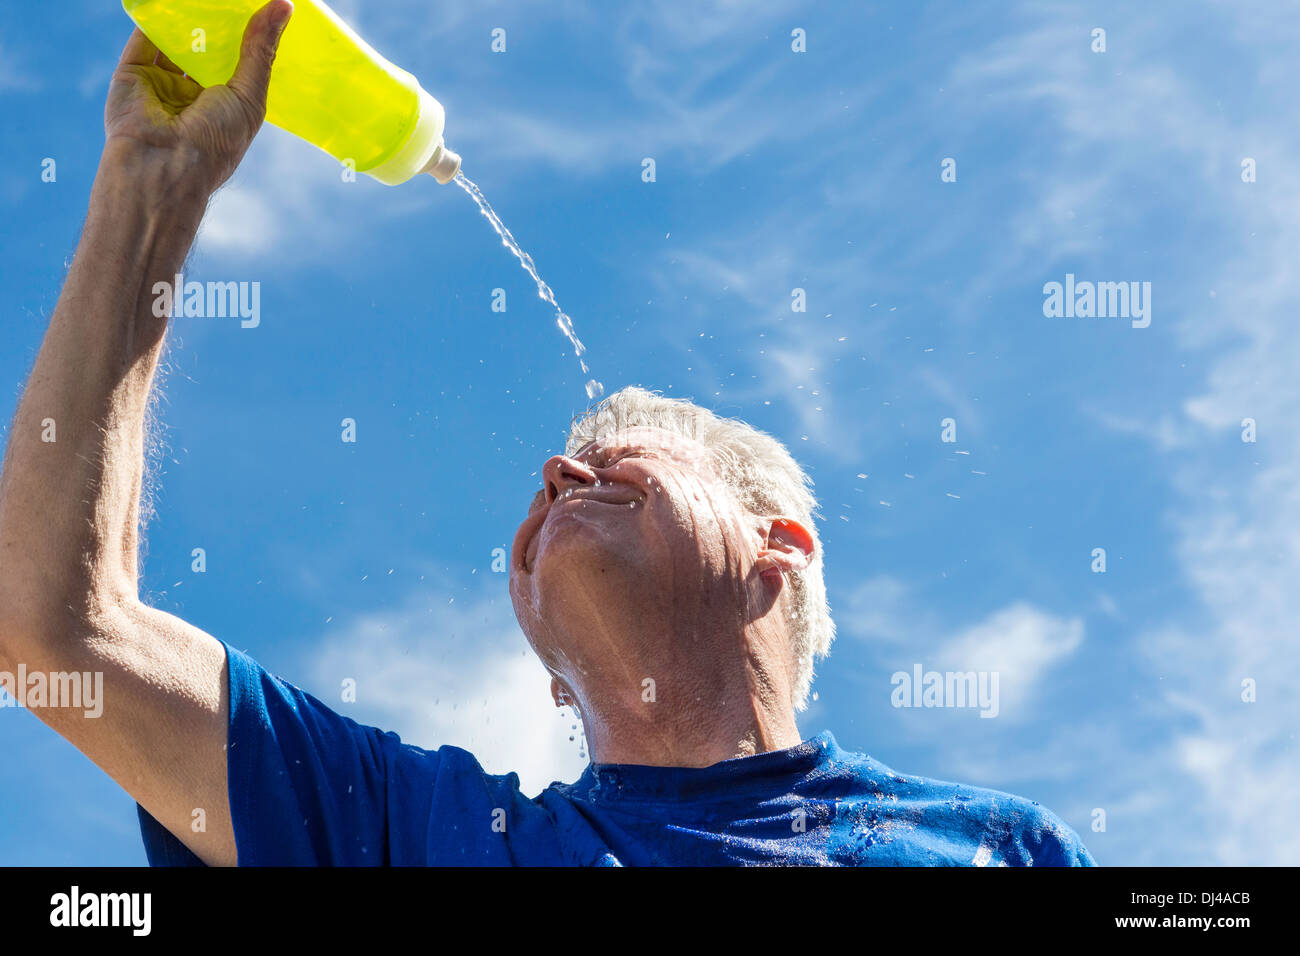 Senior man pouring water over his face to relieve heat exhaustion, United States Stock Photo